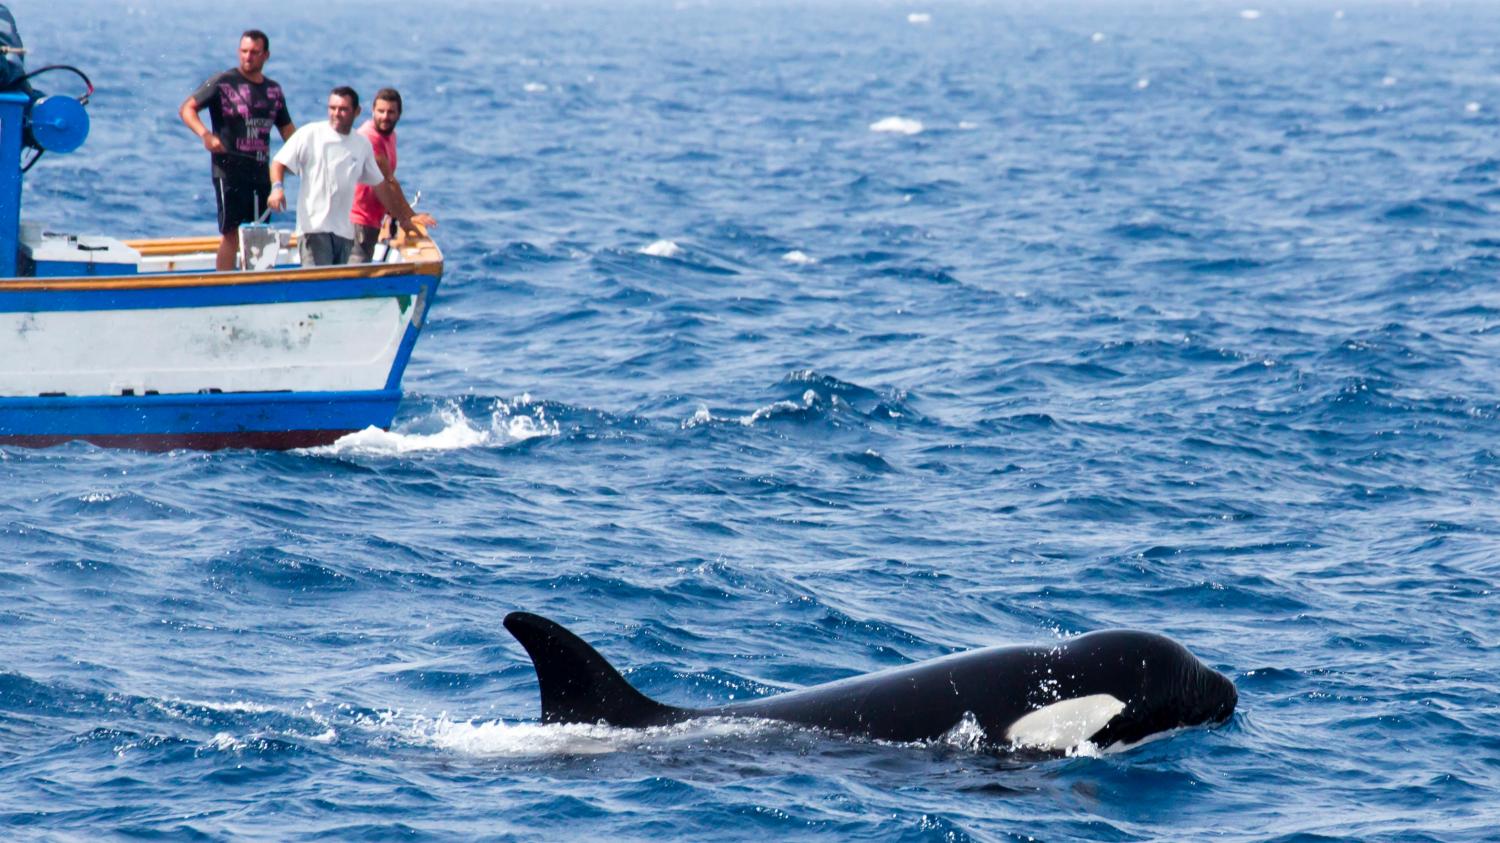 Photograph showing the ocean with people on a yacht and an Orca in the water